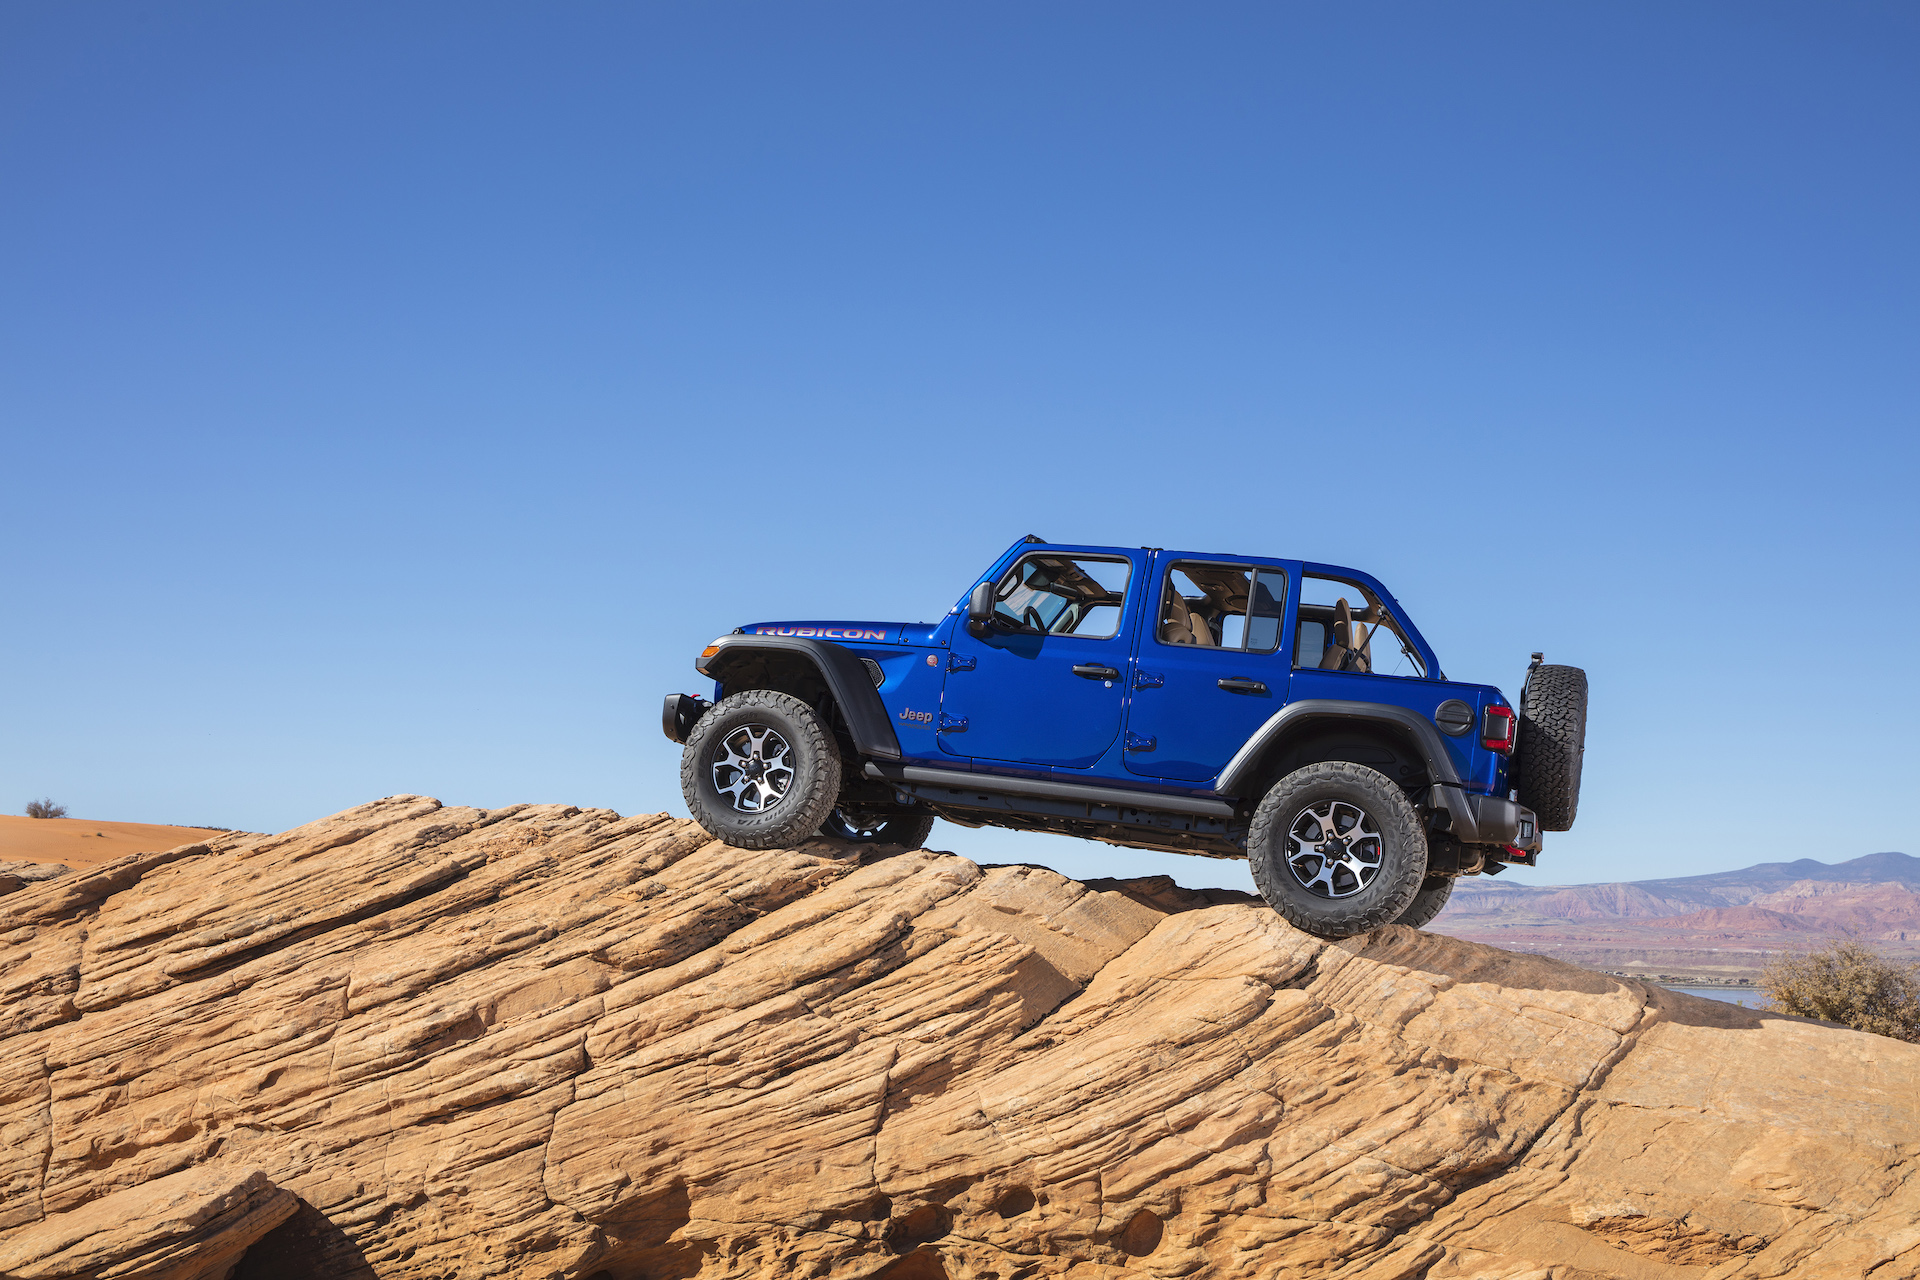 2020 Jeep Wrangler diesel rated 25 MPG, plug-in hybrid on the way